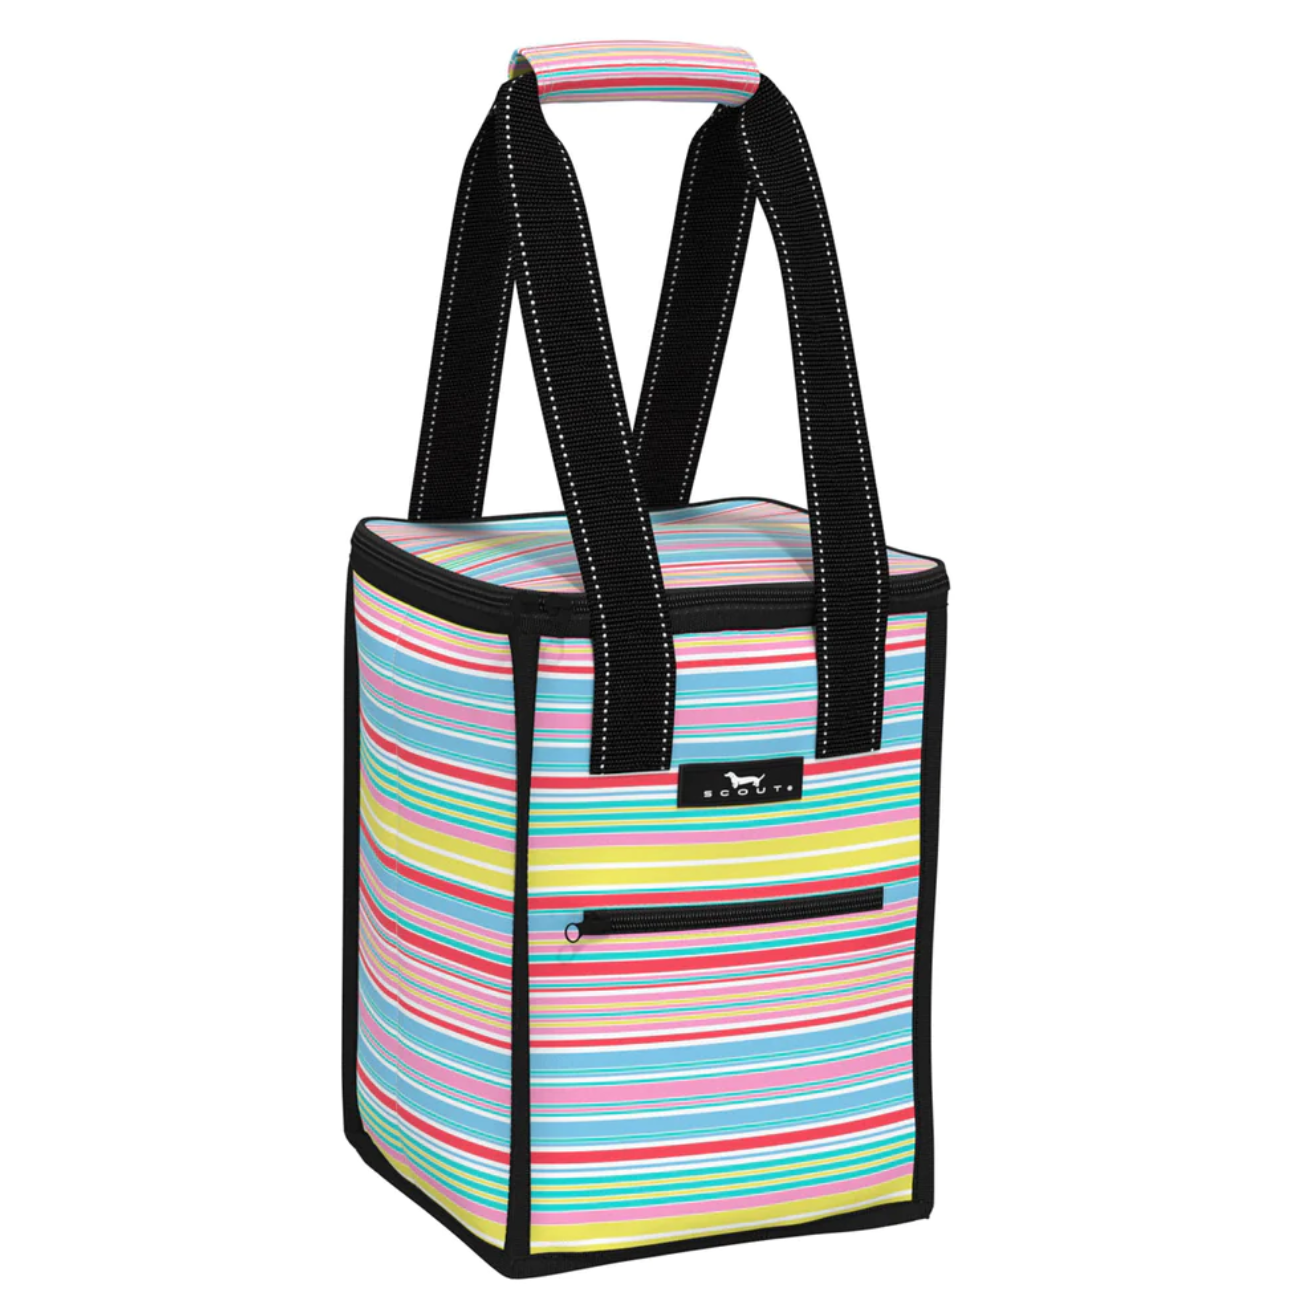 Scout Pleasure Chest Cooler Coolers in Ripe Stripe at Wrapsody